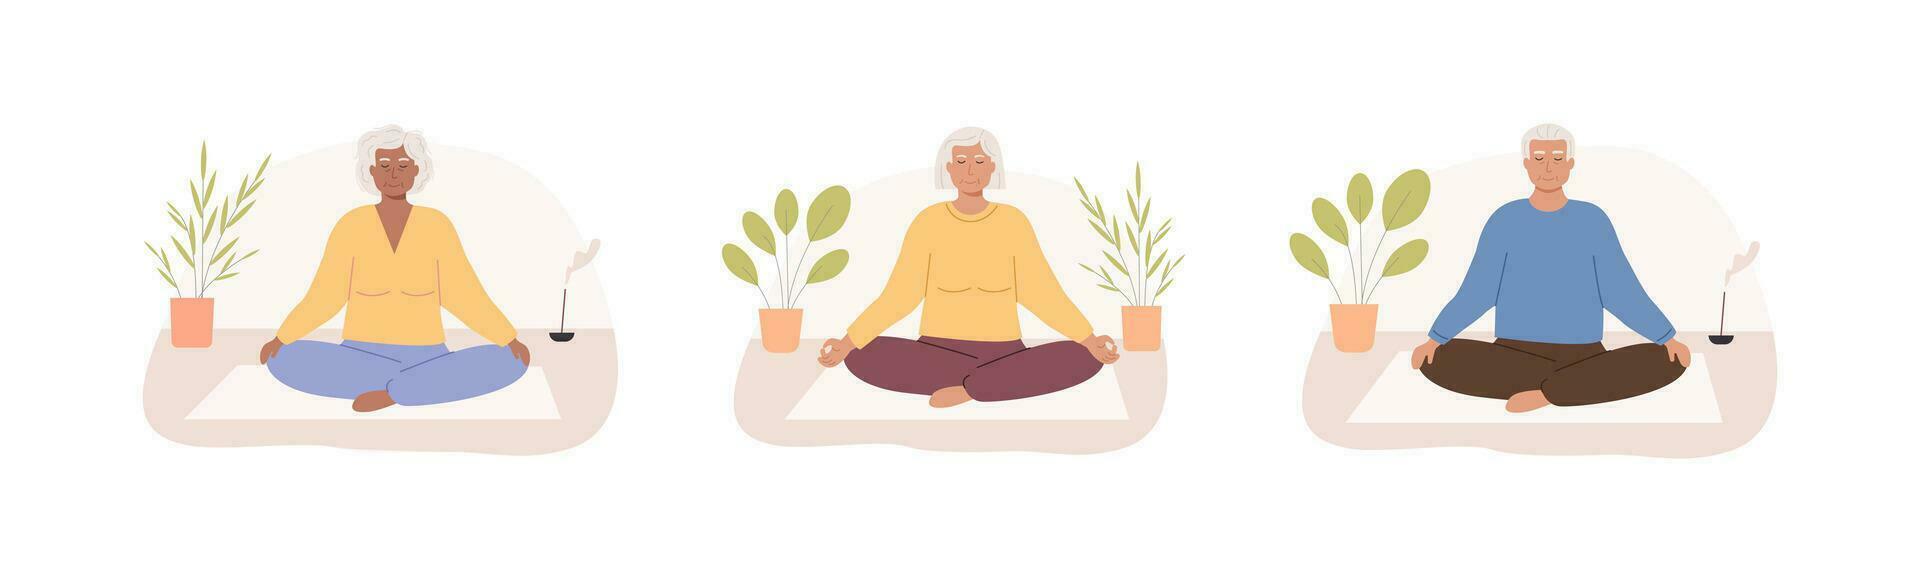 Modern elderly african woman with crossed legs and closed eyes meditating. Senior old granny sitting and practicing yoga, mindfulness meditation, breath control exercises. Vector flat illustration.